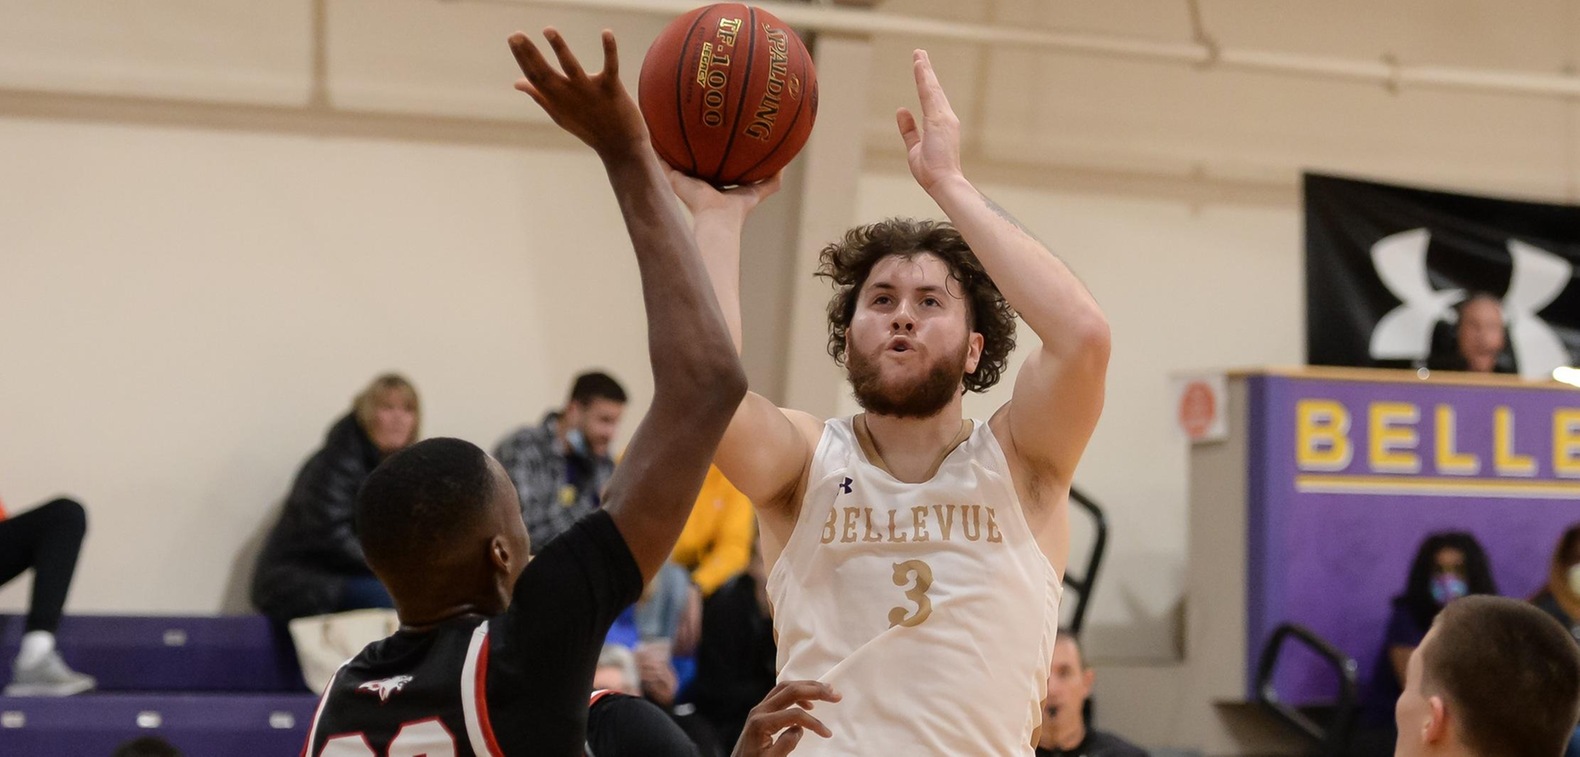 Vinny Belcaster scored a team-high 21 points for the Bruins on Saturday.